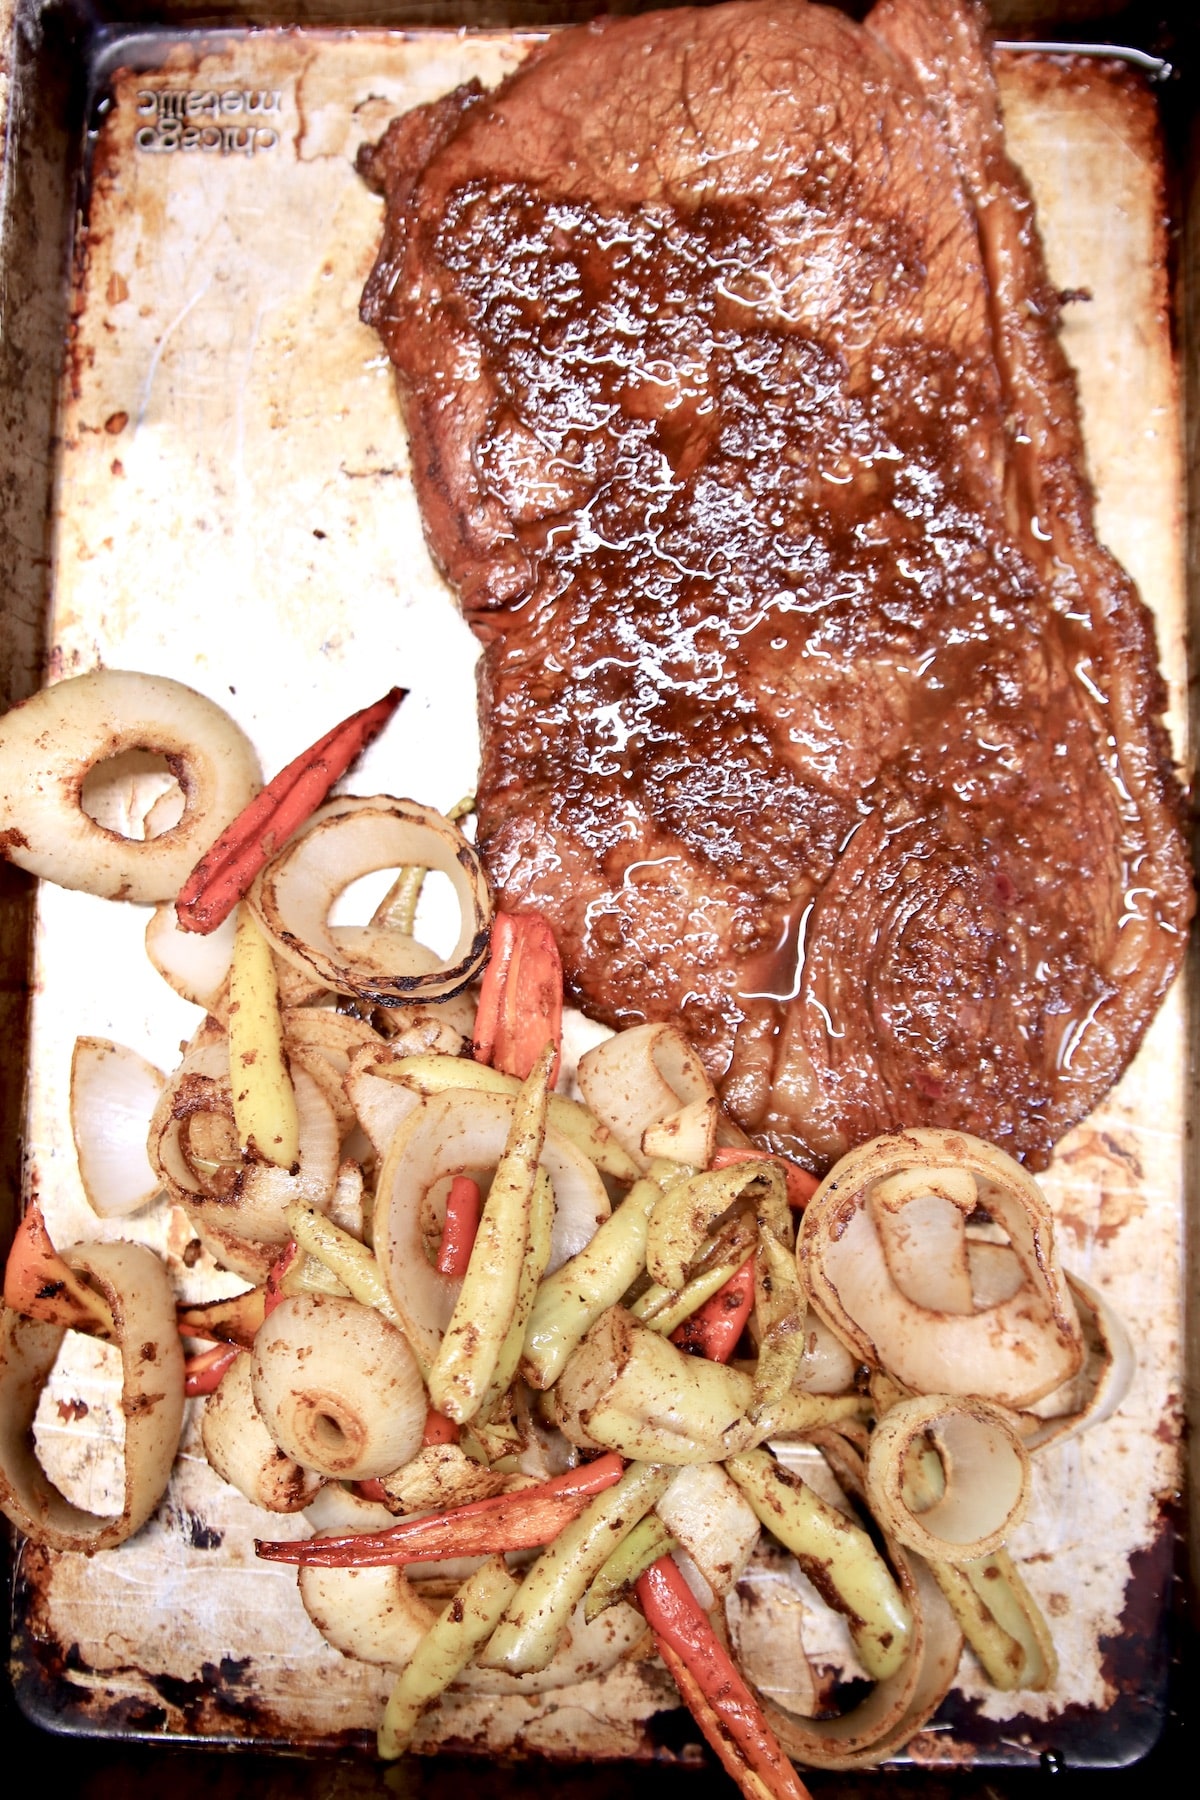 Grilled steak, onions and peppers on a baking sheet.